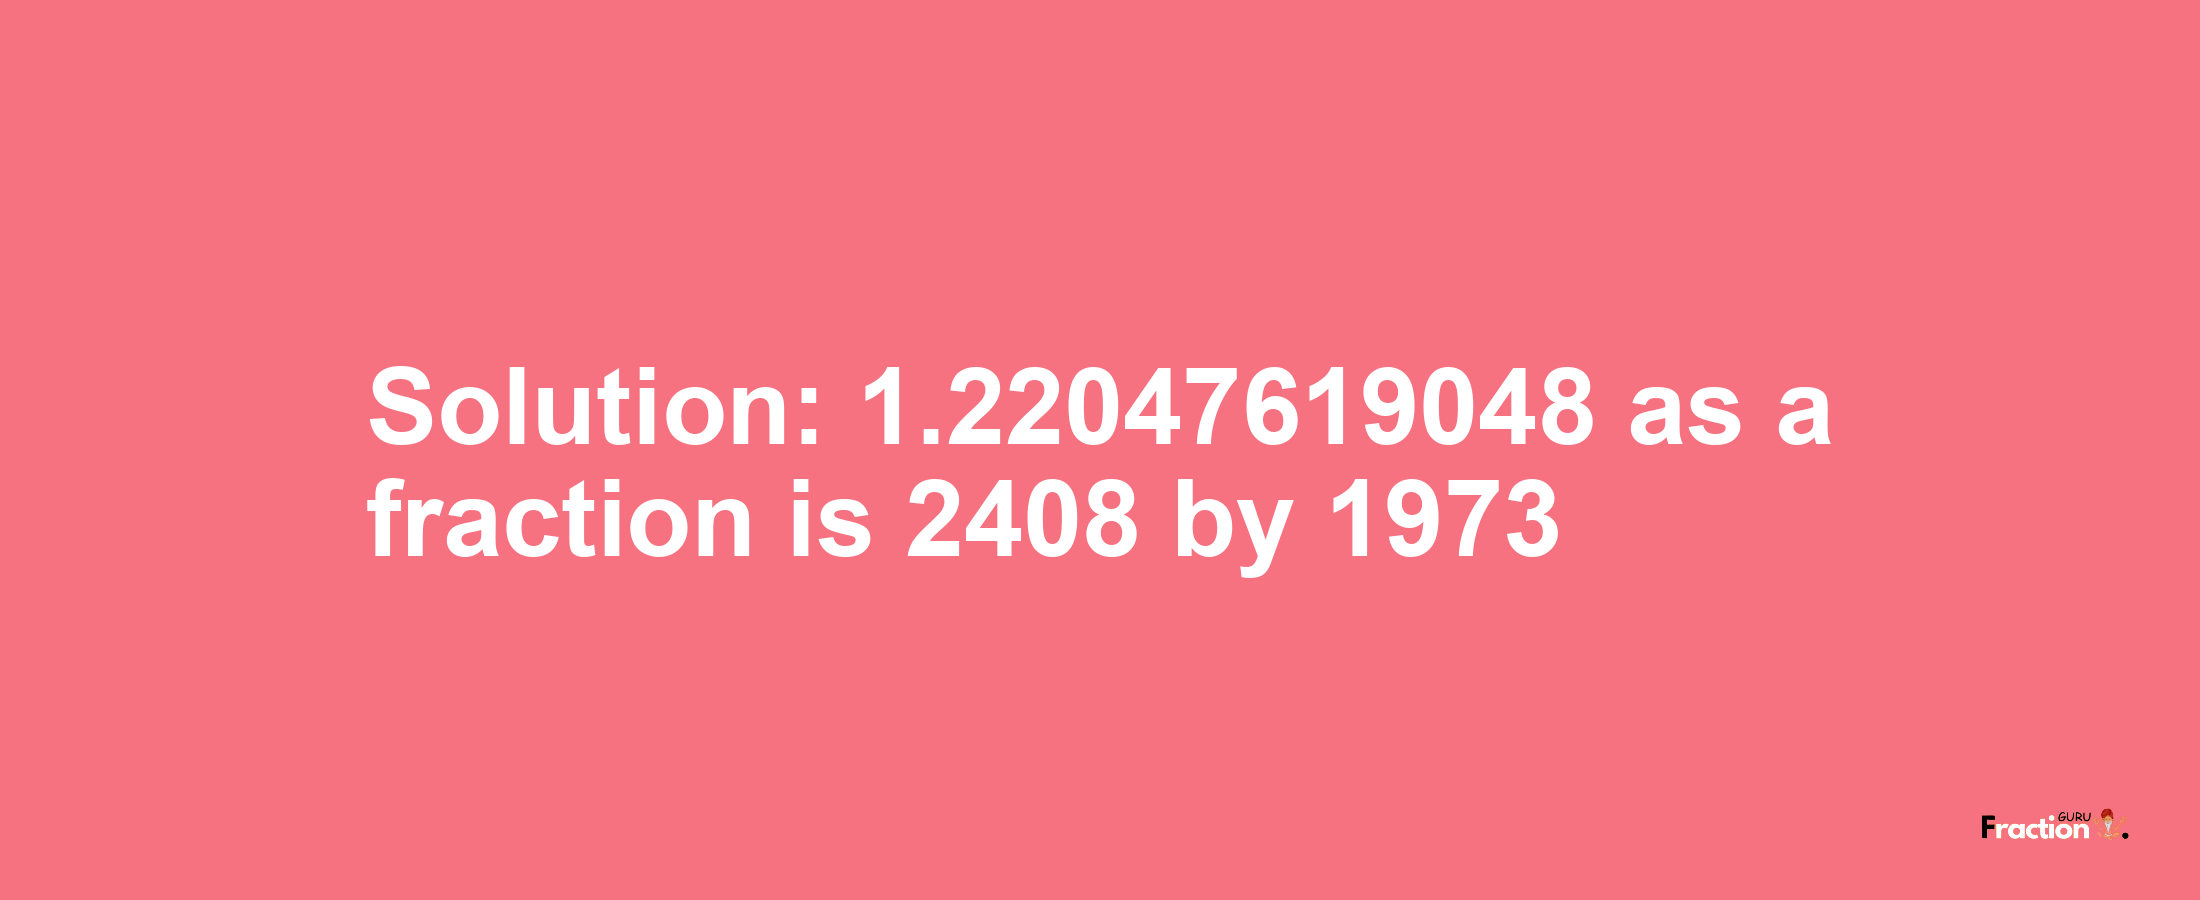 Solution:1.22047619048 as a fraction is 2408/1973